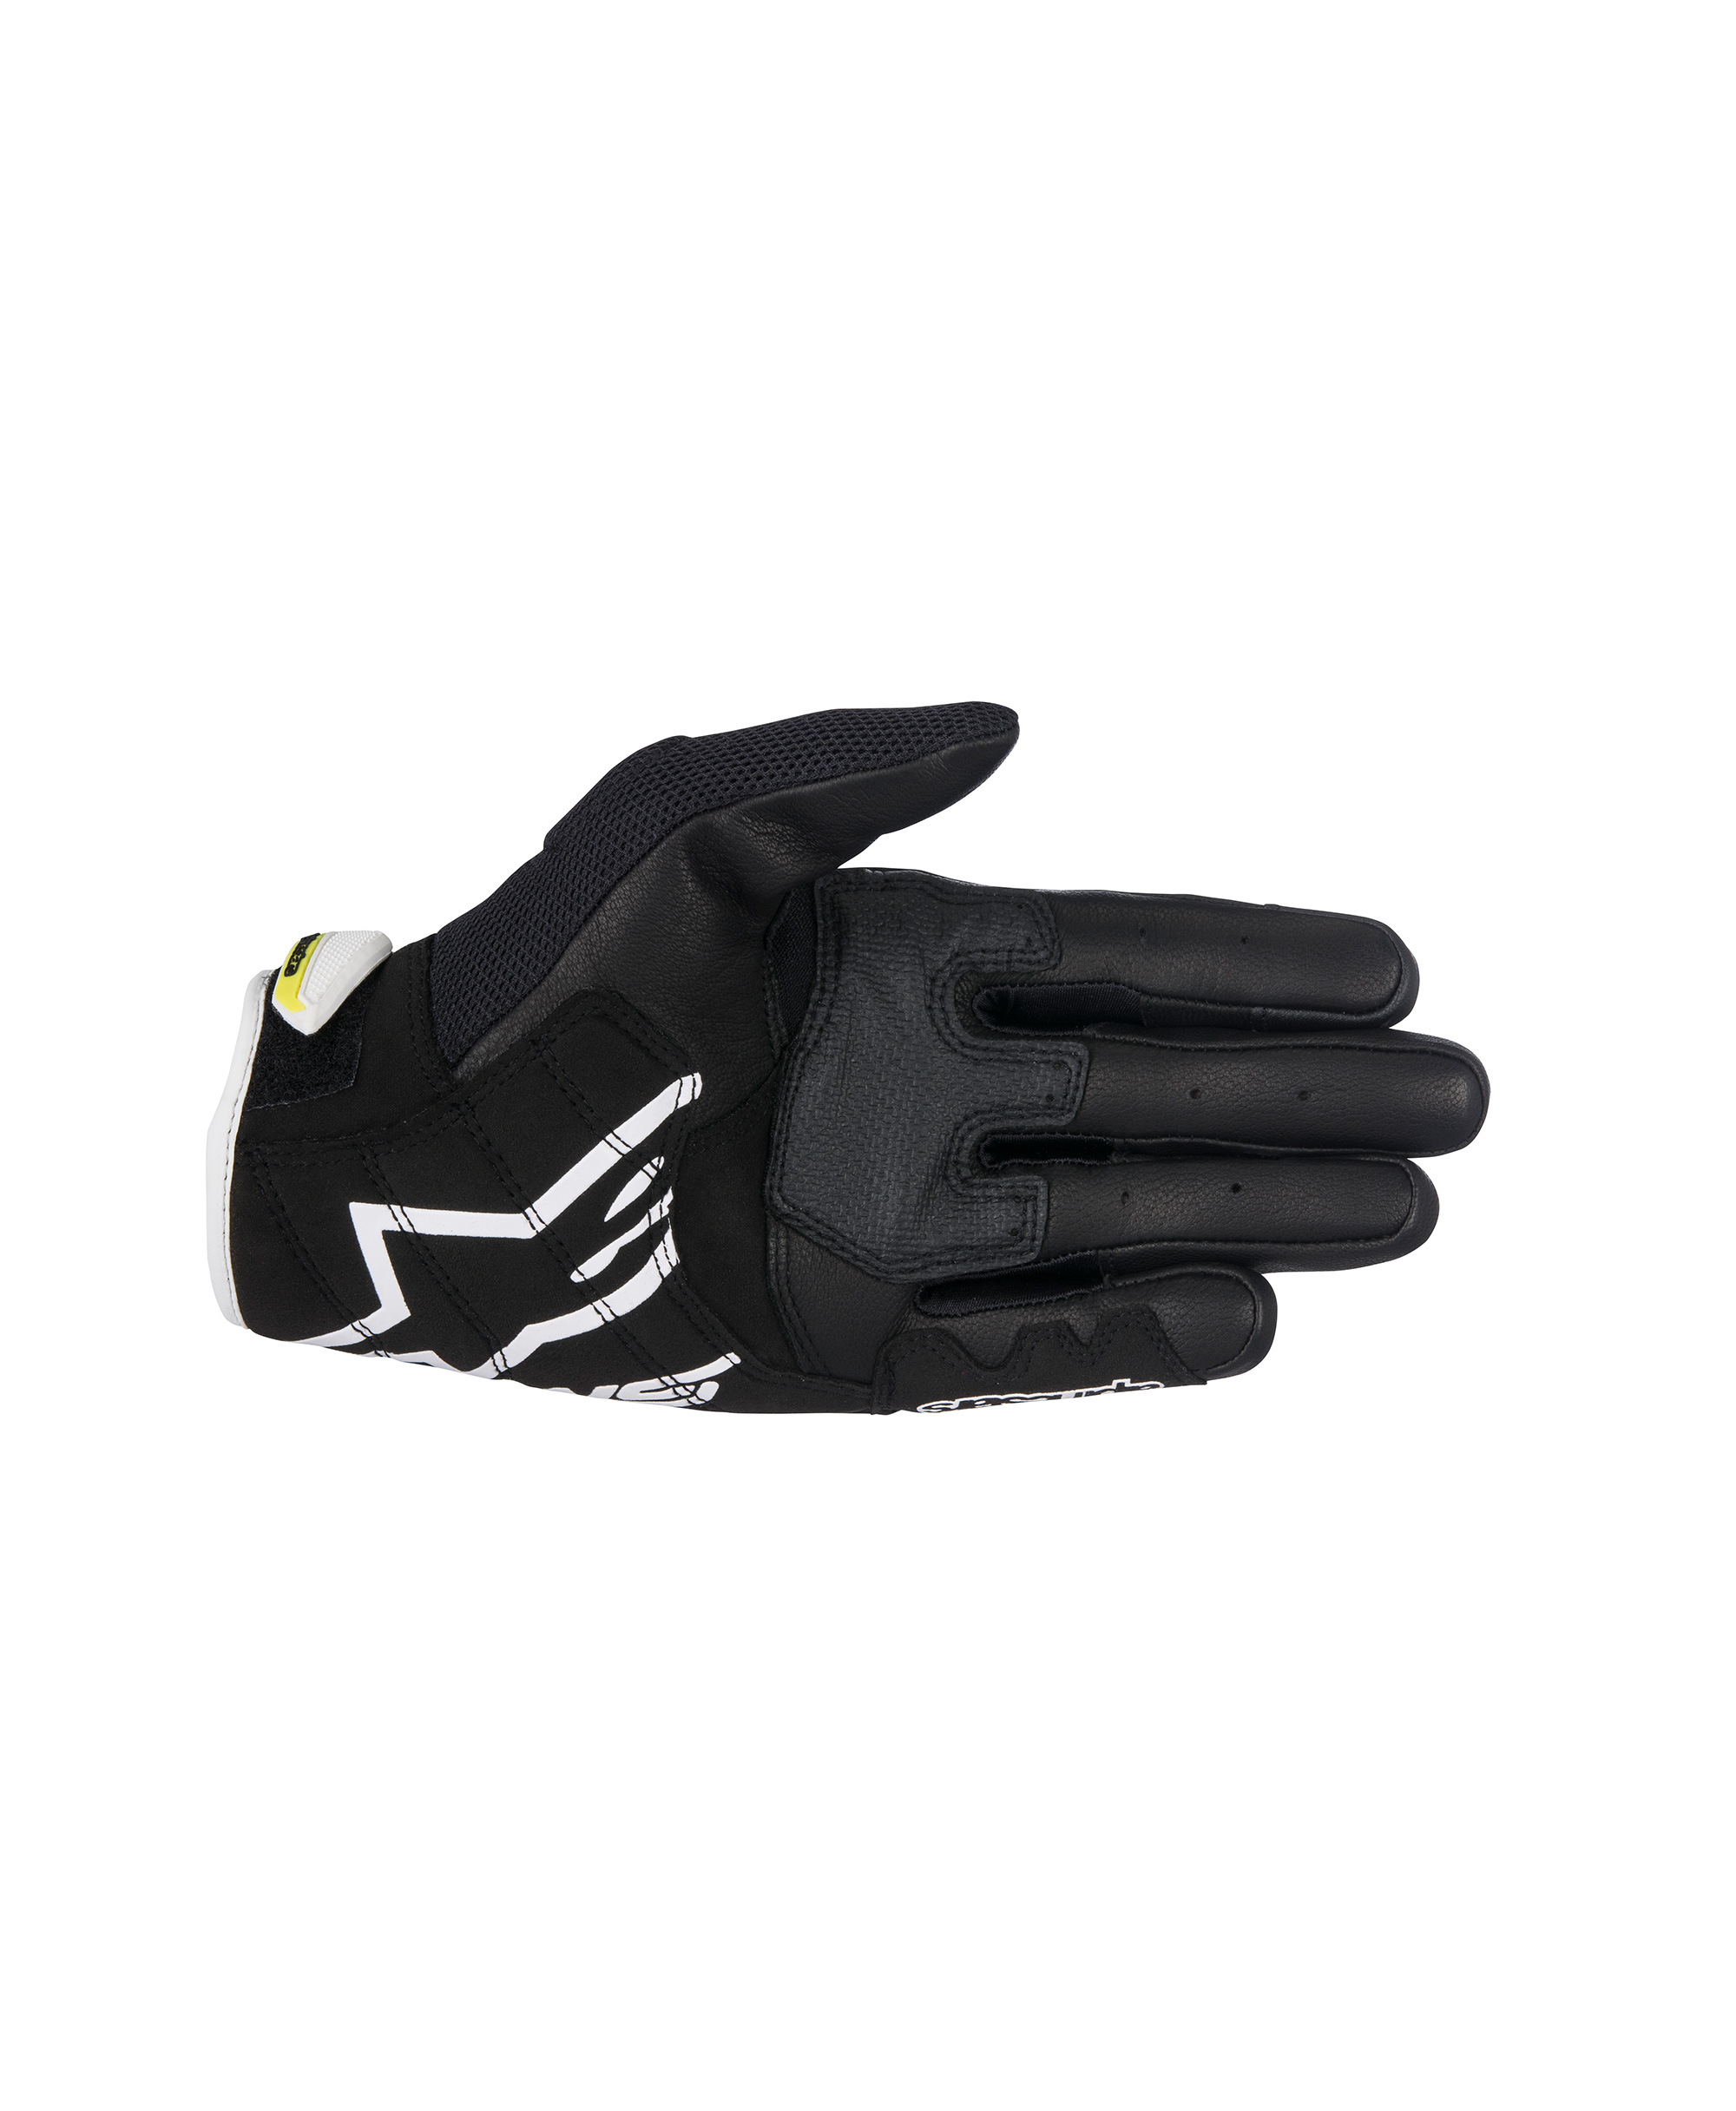 SMX-2 AIR CARBON V2 GLOVE BLACK WHITE YELLOW FLUO